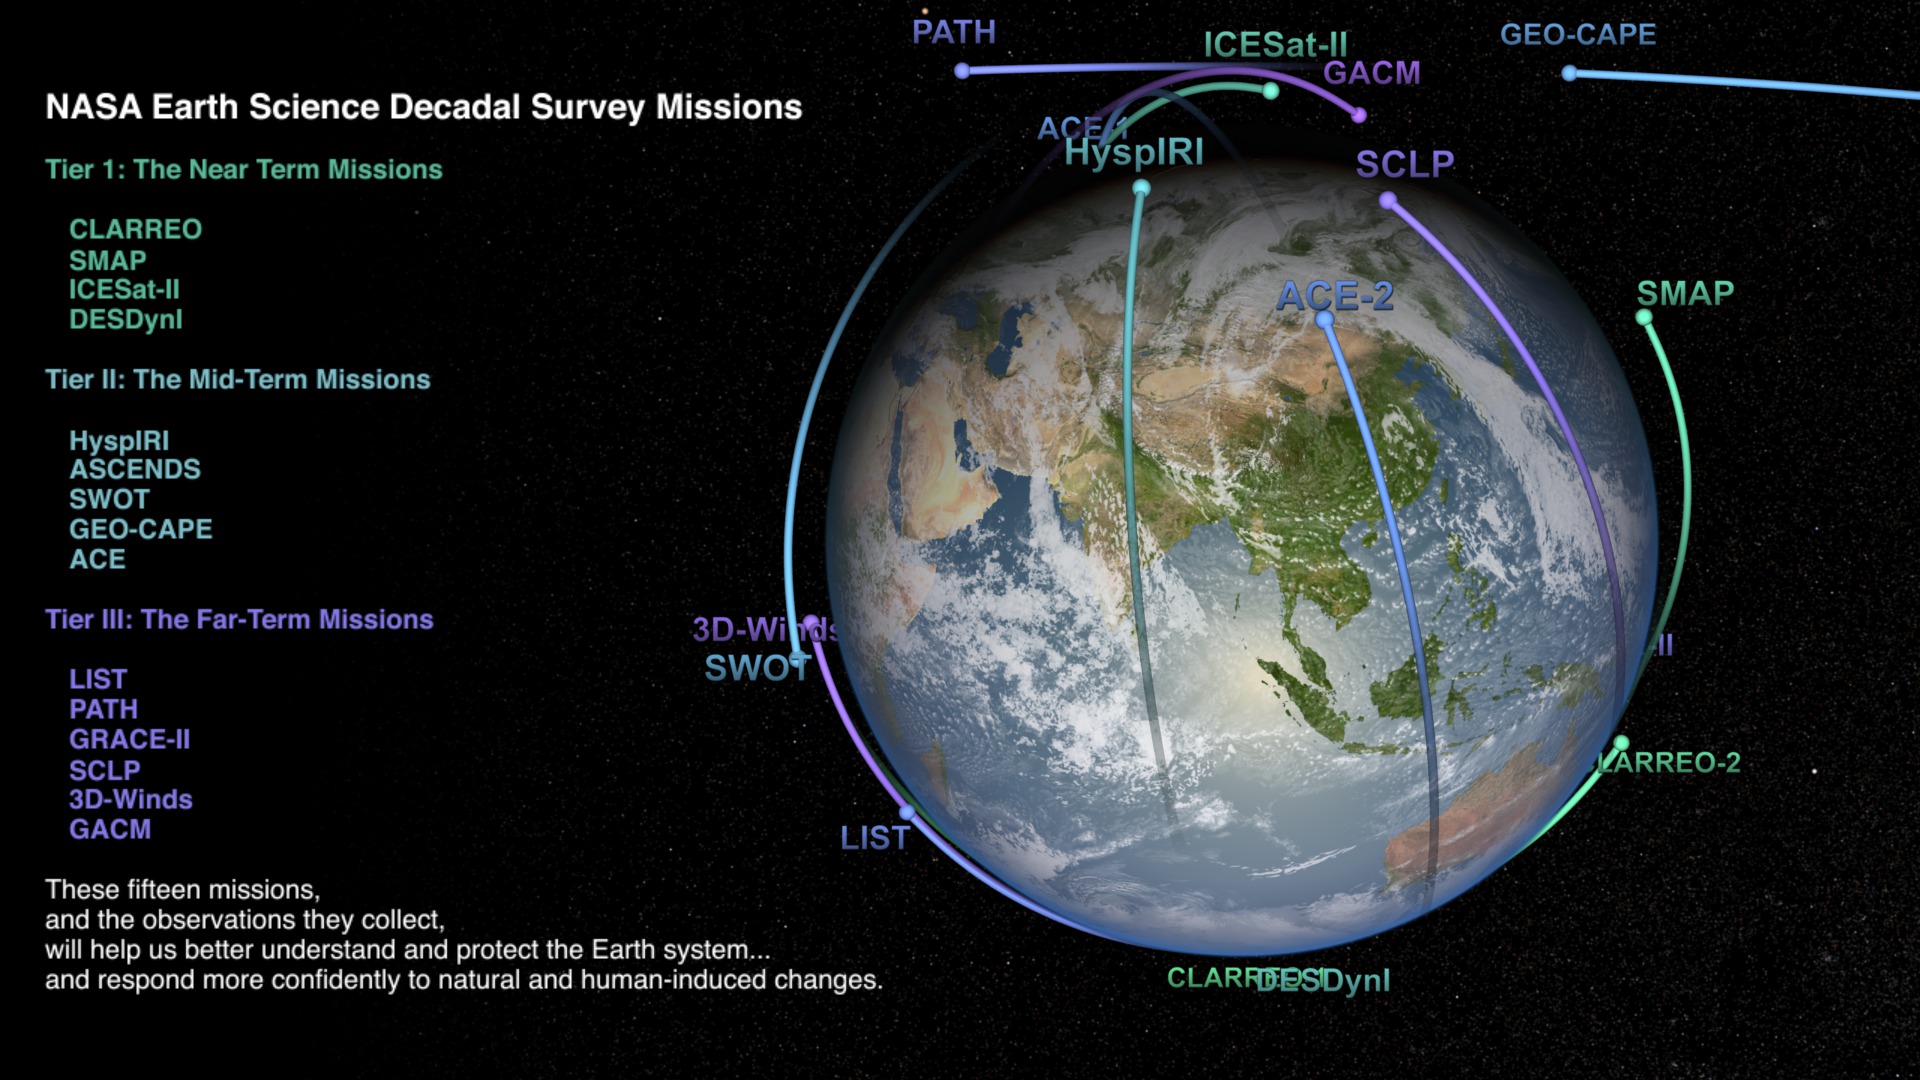 As each decadal survey satellite's orbital path is highlighted in color, the text briefly summarizes the mission's scientific goals.This video is also available on our YouTube channel.